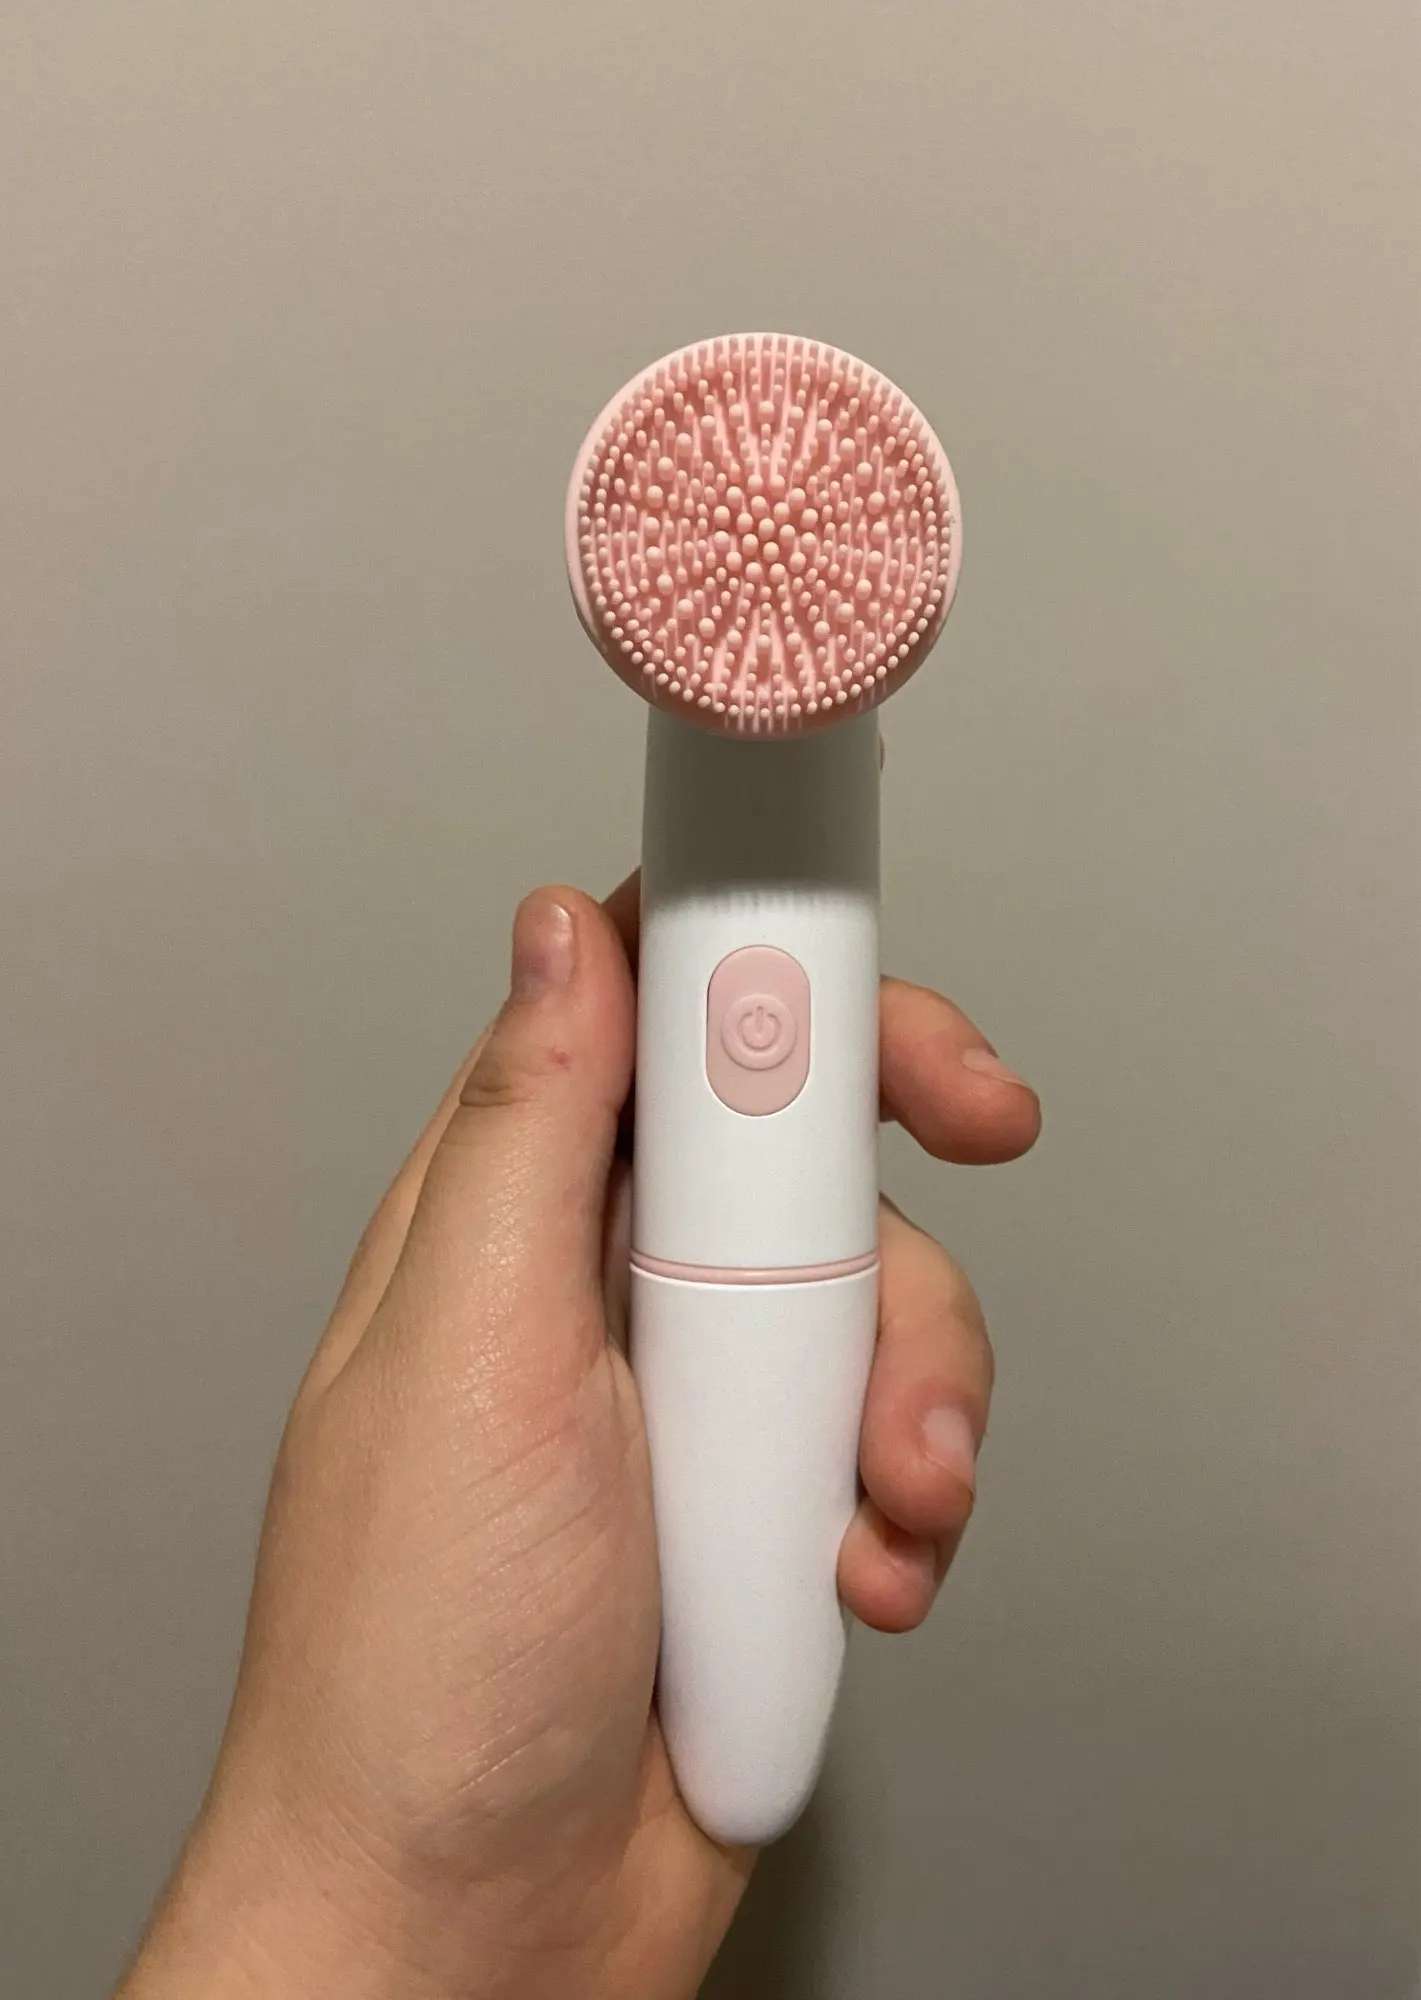 Electric Face Cleansing Brush For Facial Skin Care Wash Sonic Vibration Massage Tool 2 in 1 Acne Pore Blackhead Silicone Cleaner photo review